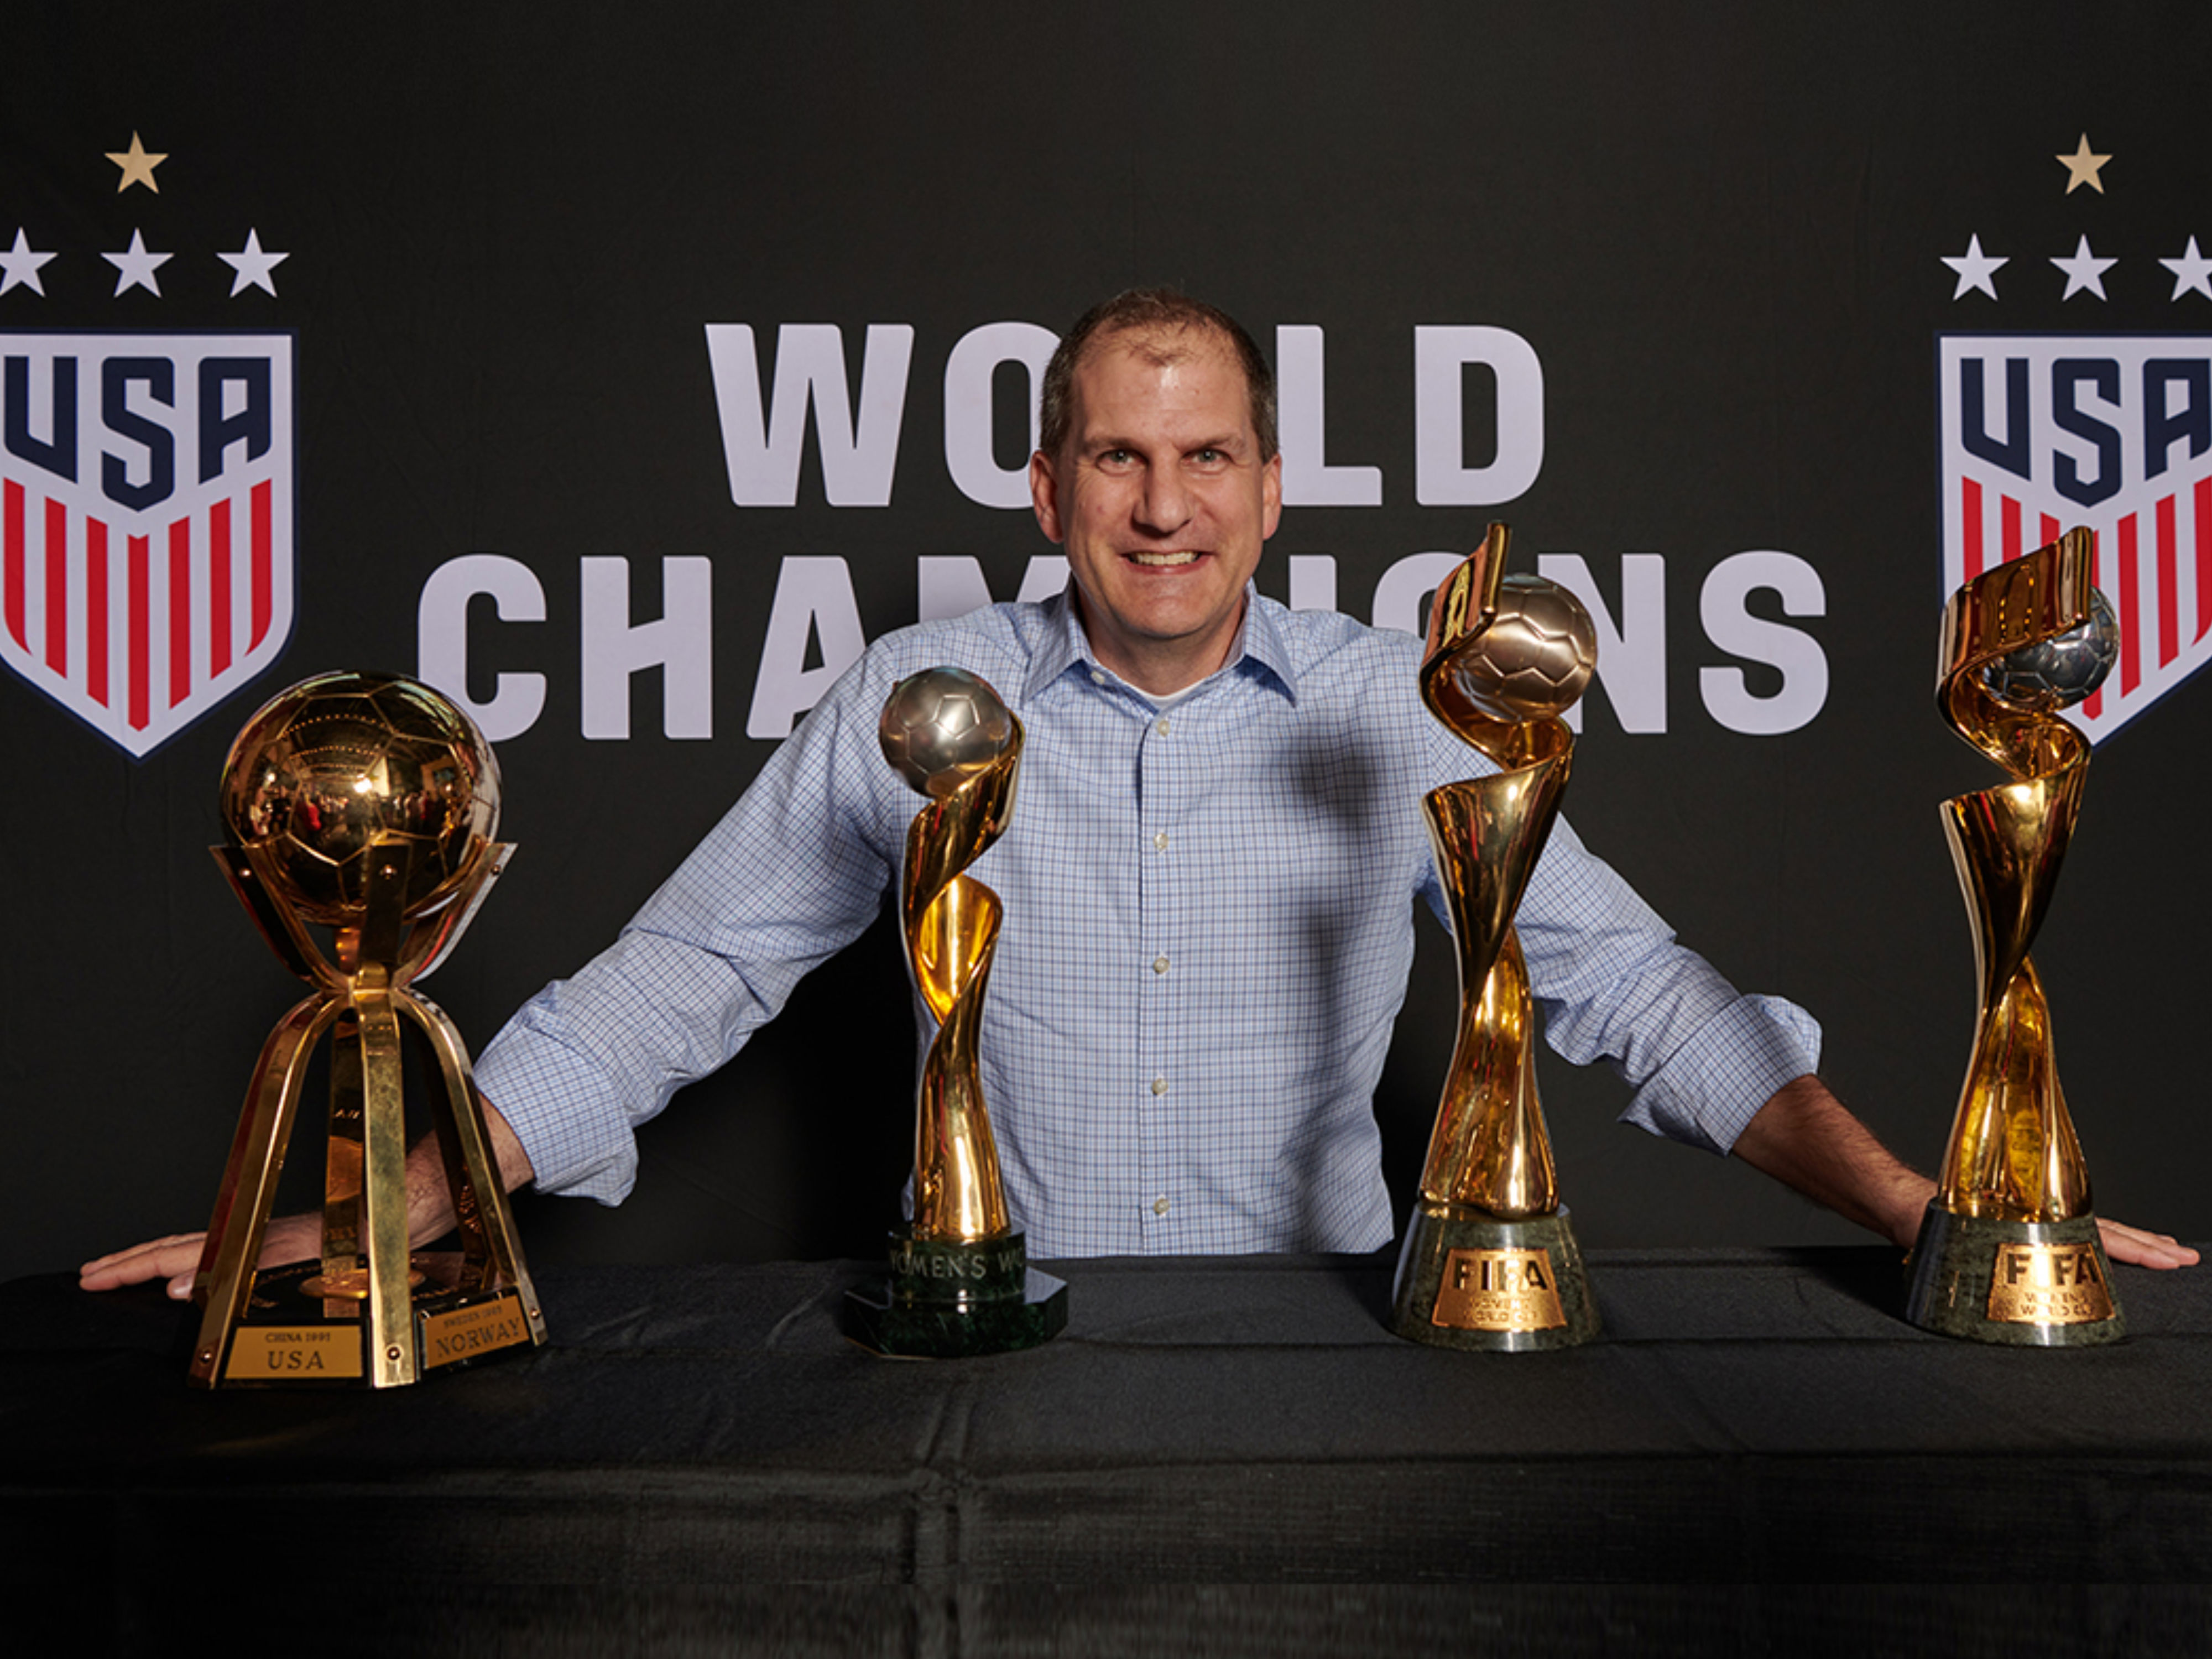 Image of Jung von Matt SPORTS CEO Brian Remedi smiling and standing behind four trophies.